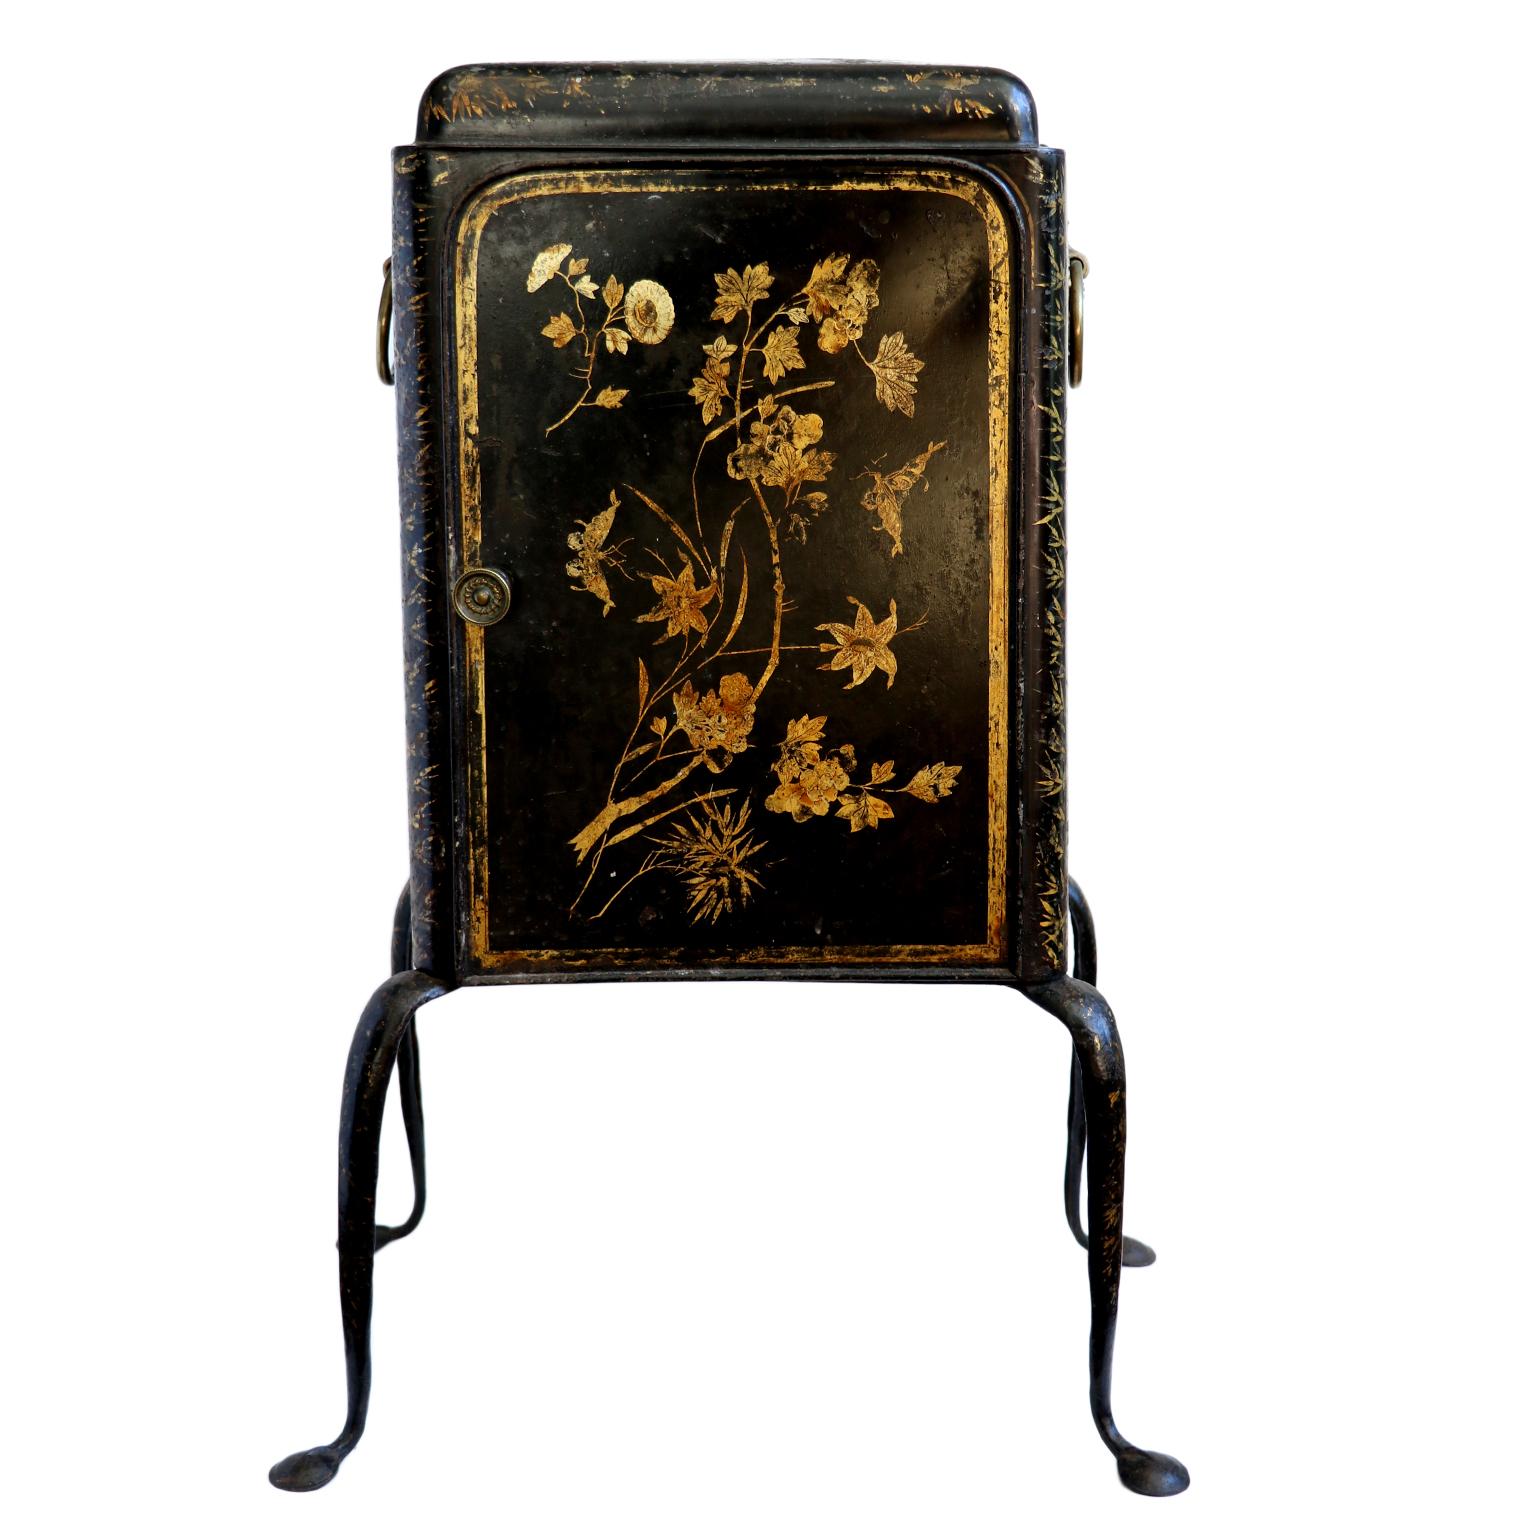 Indulge in the grandeur of an Antique Regency Plate Warmer, dating back to the 1800s. This remarkable piece is a testament to the lavishness of the time period, boasting intricate artwork and unparalleled craftsmanship. Its exquisite design and rich